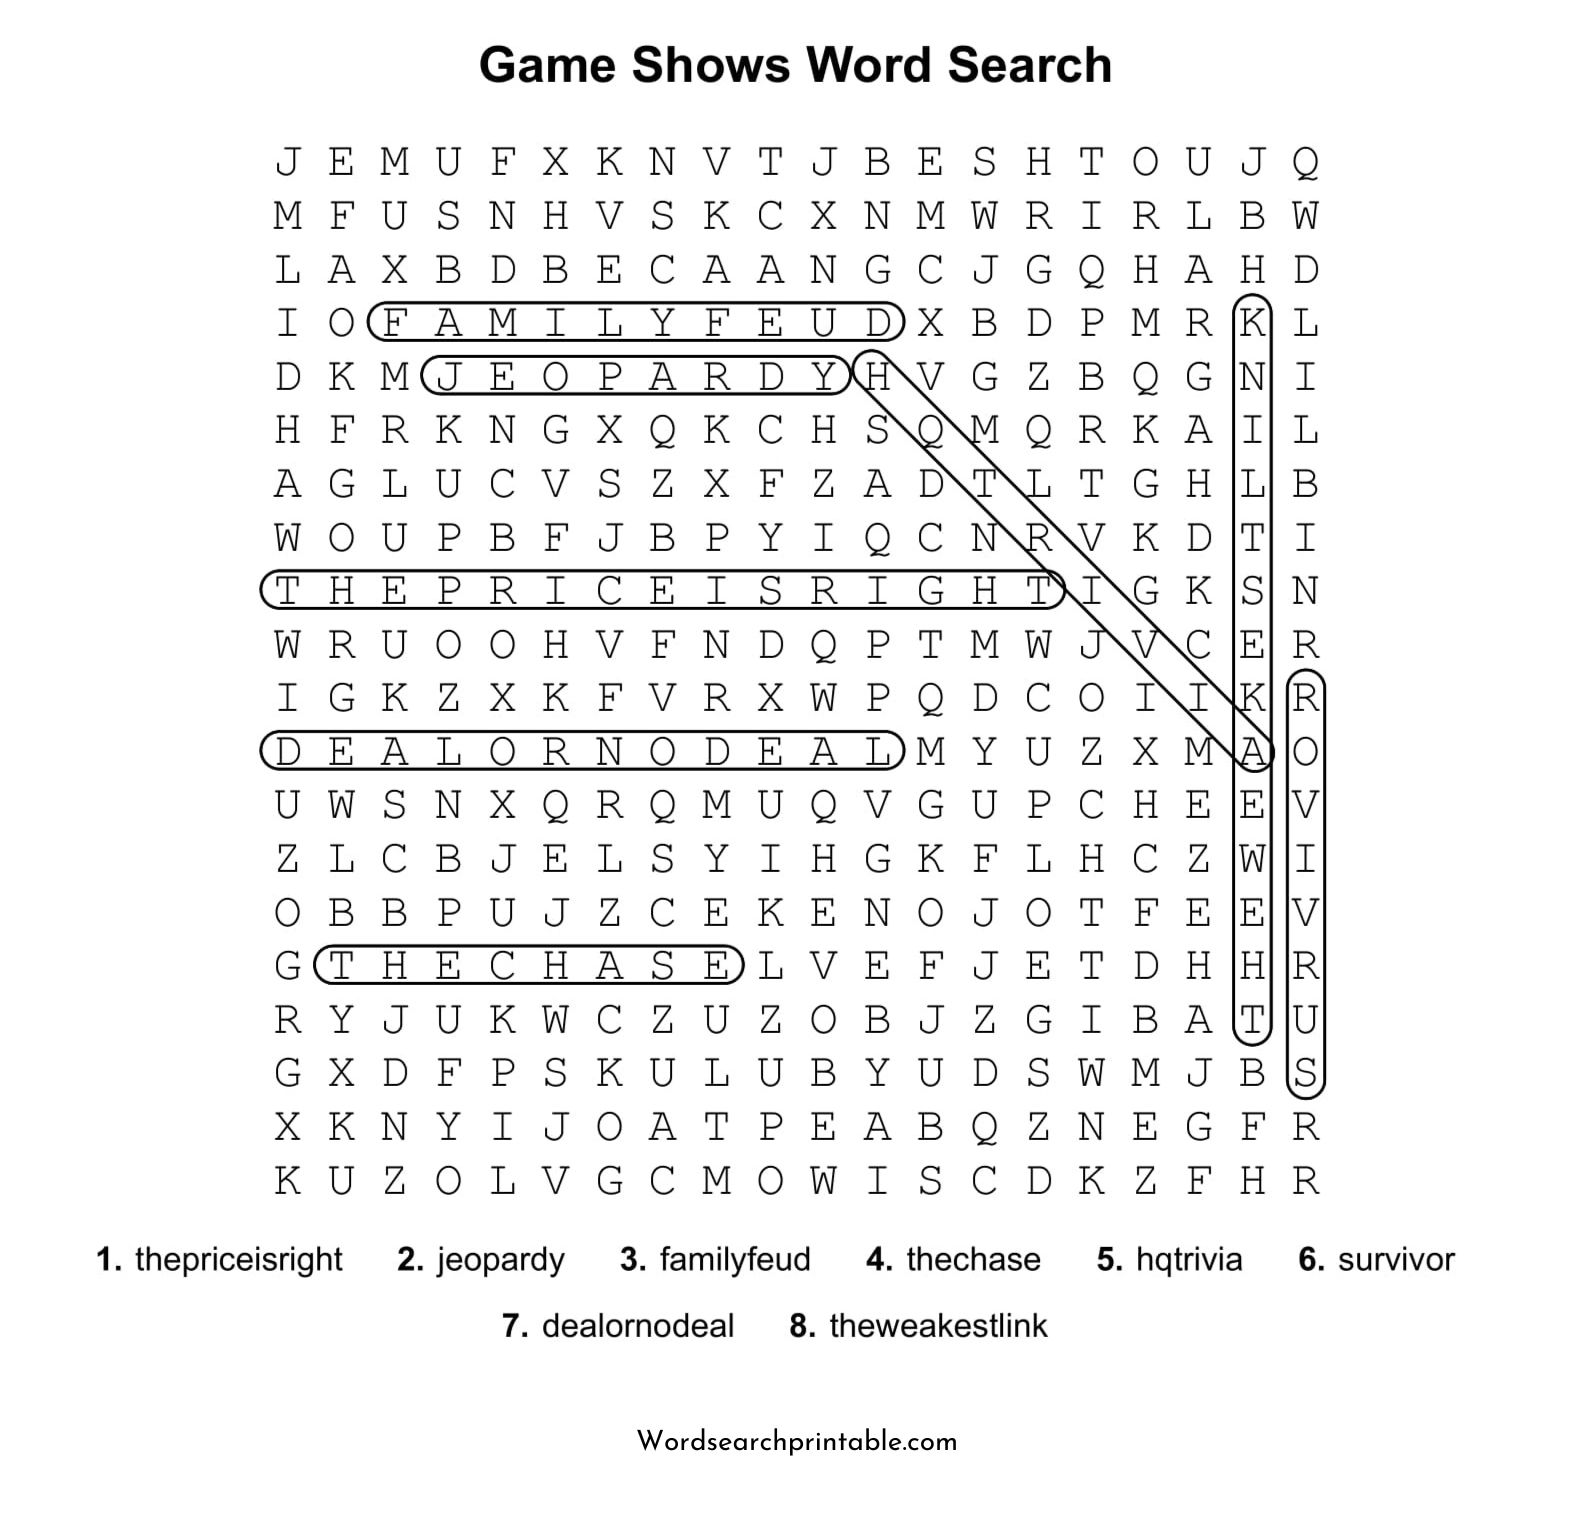 game shows word search puzzle solution